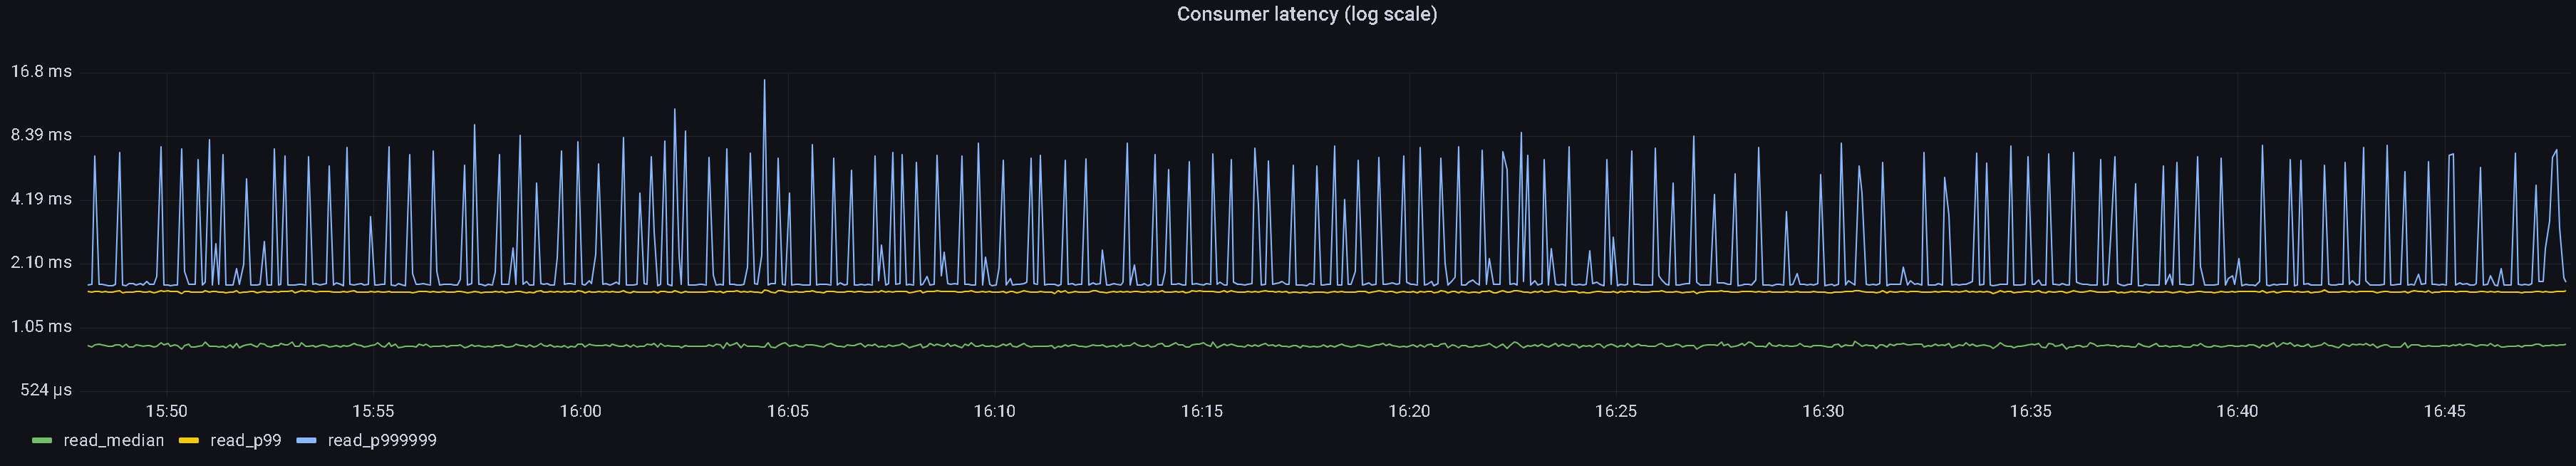 stream latency over 1-hour